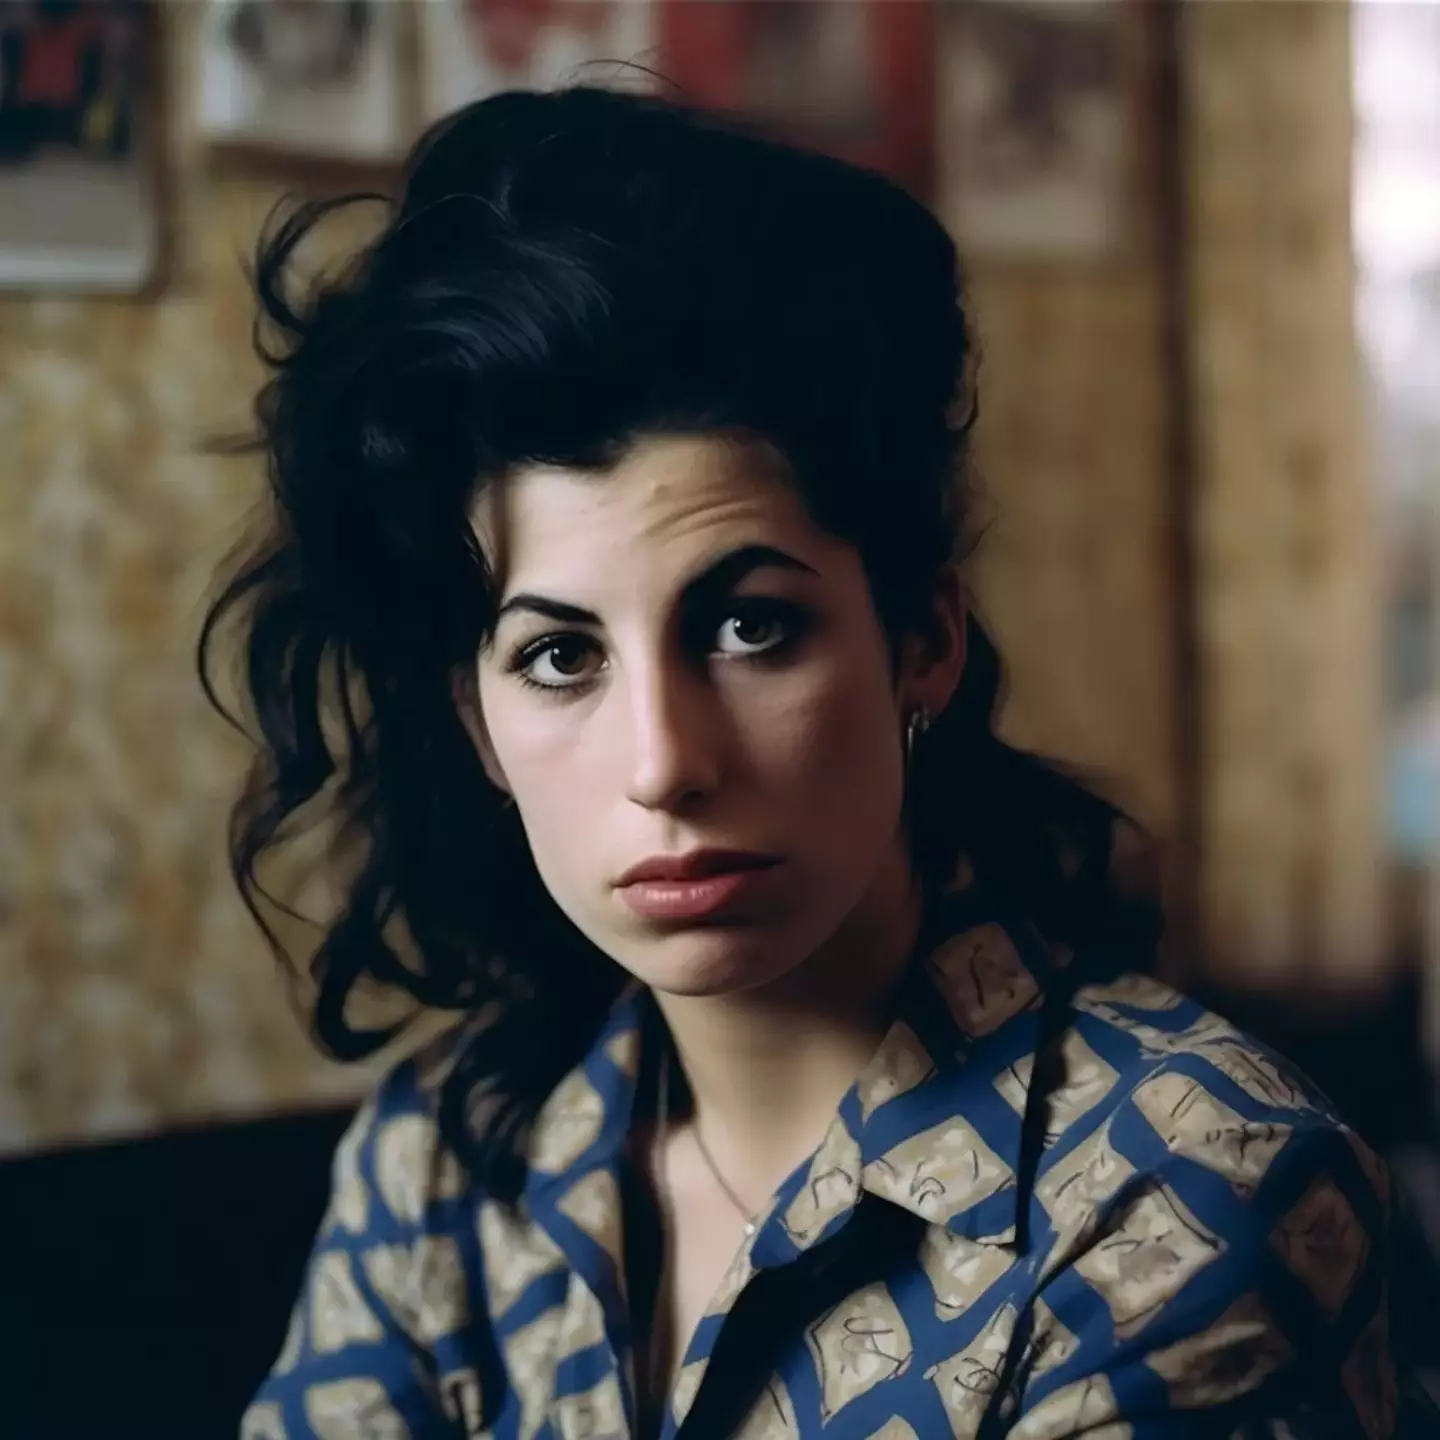 Amy Winehouse if she were alive today according to AI.